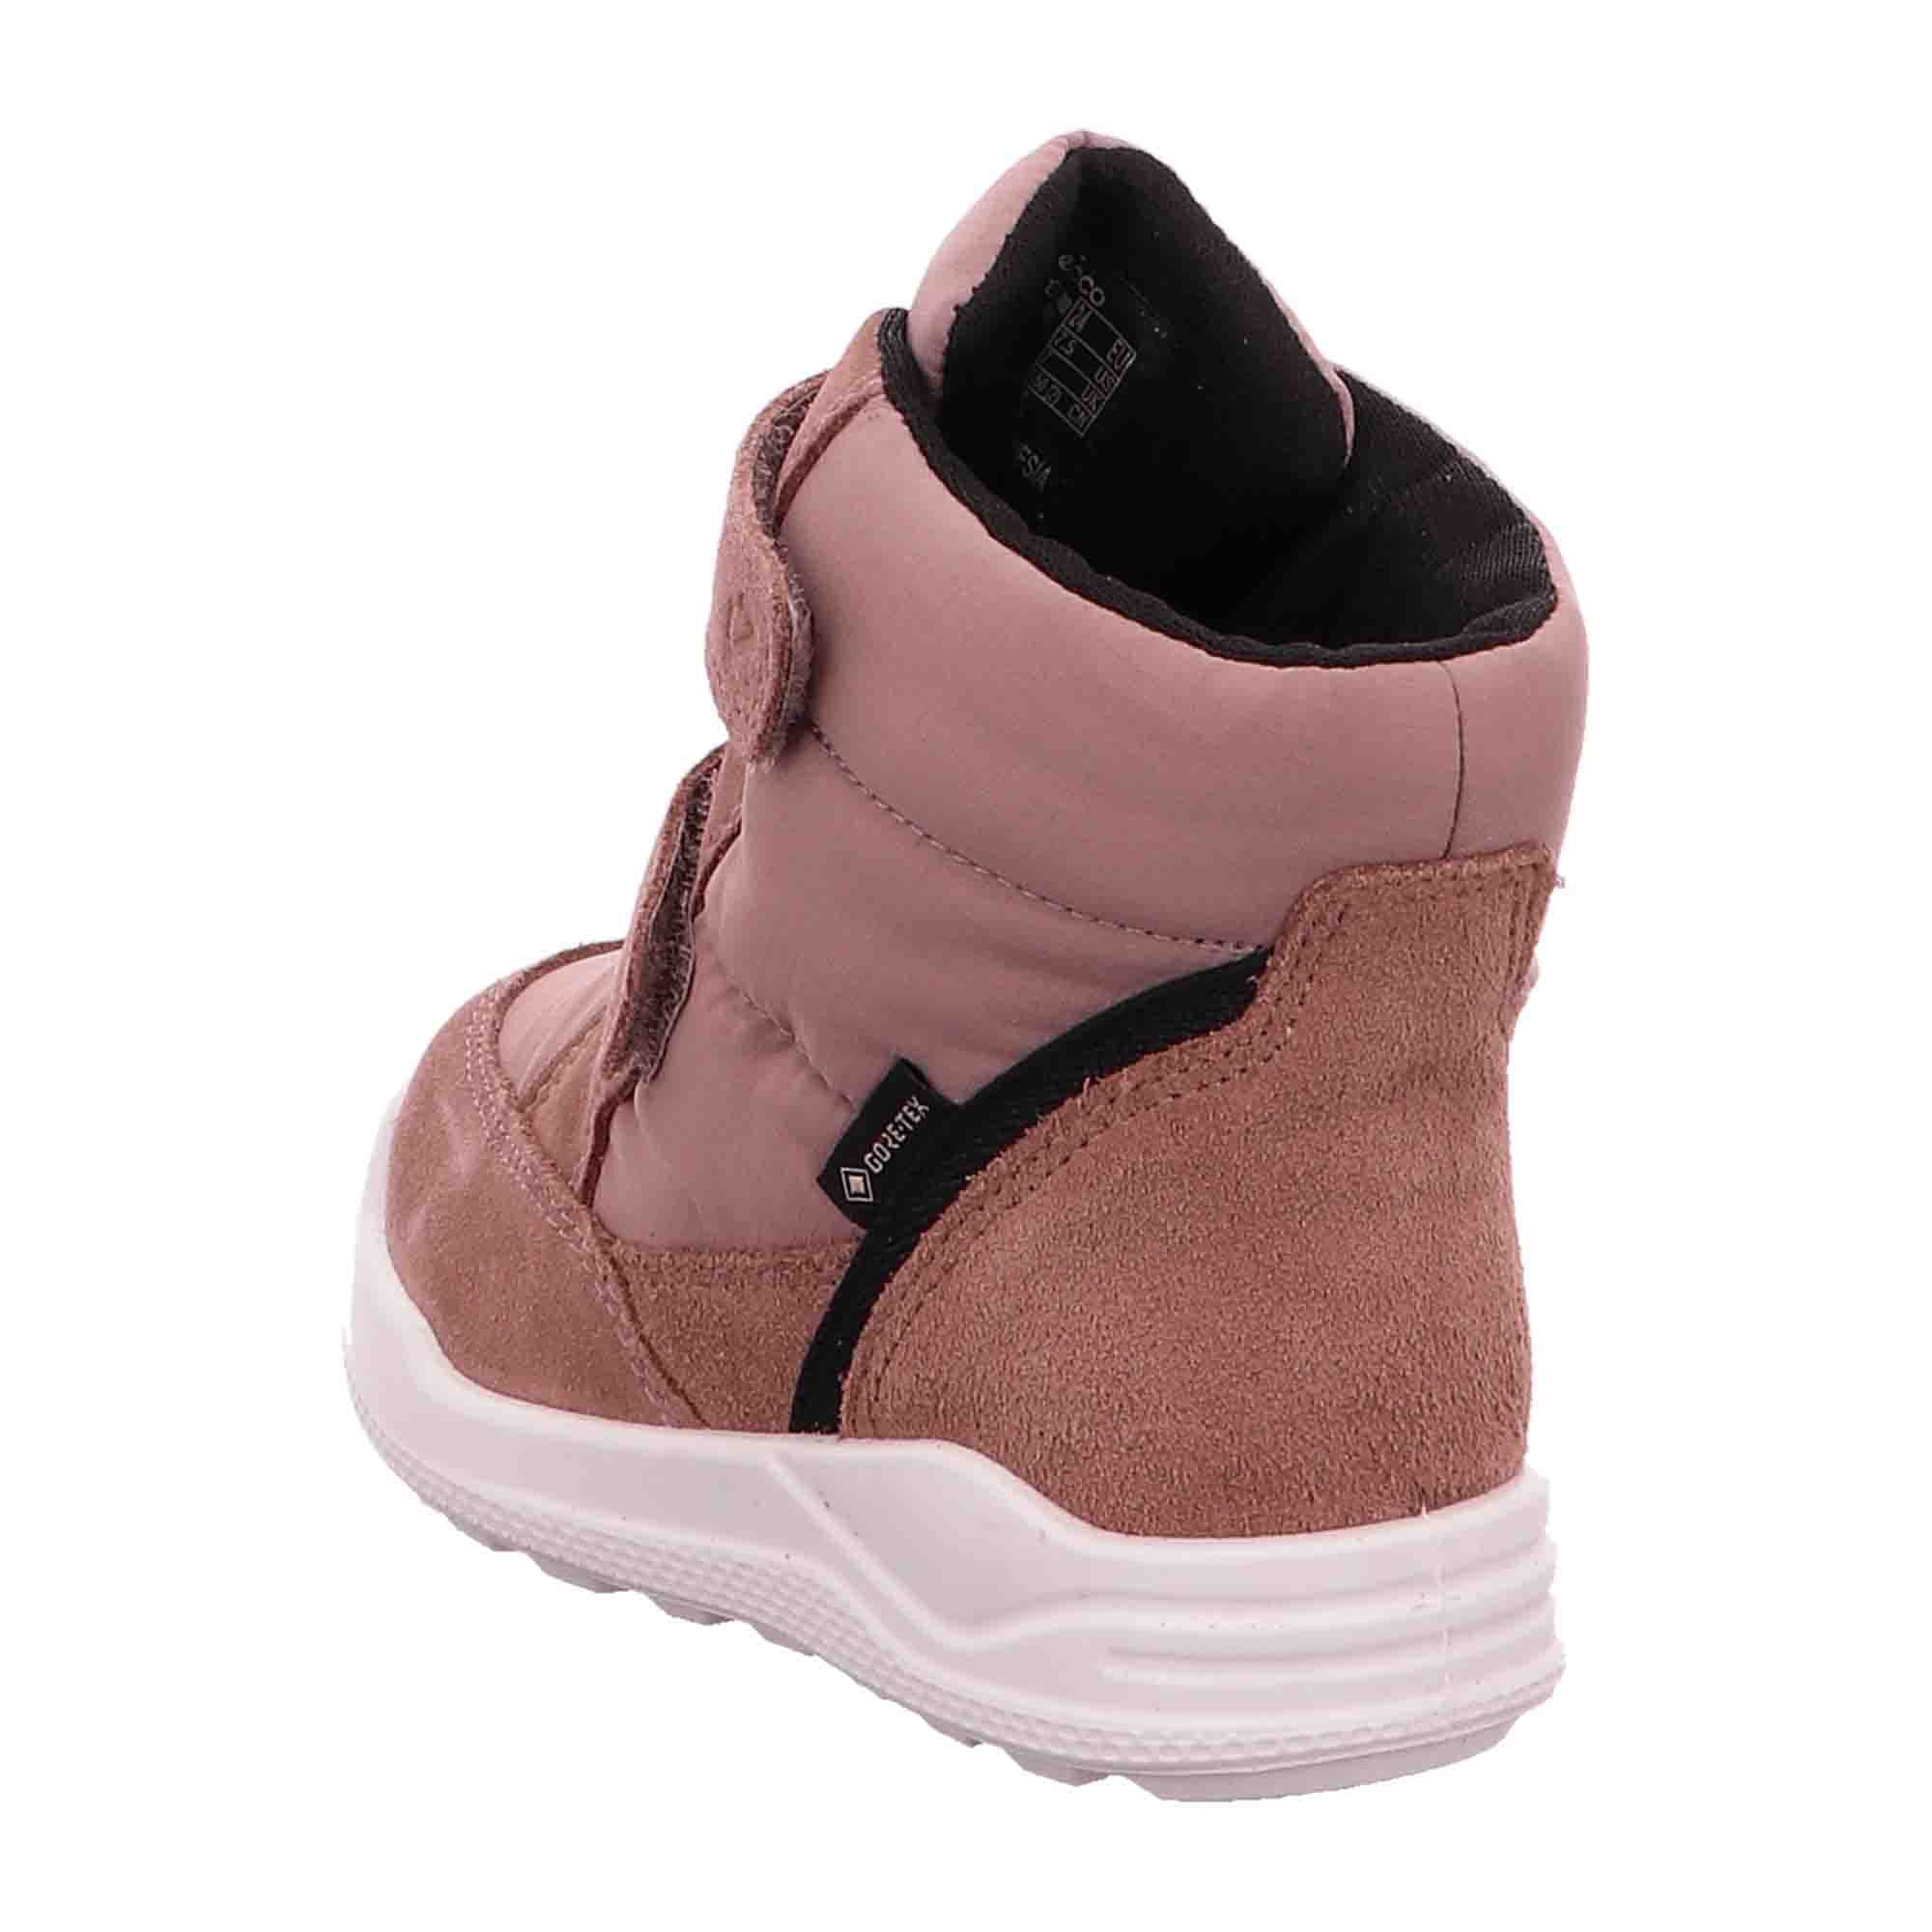 Ecco 764801 Kids' Pink Durable Shoes - Stylish & Comfortable